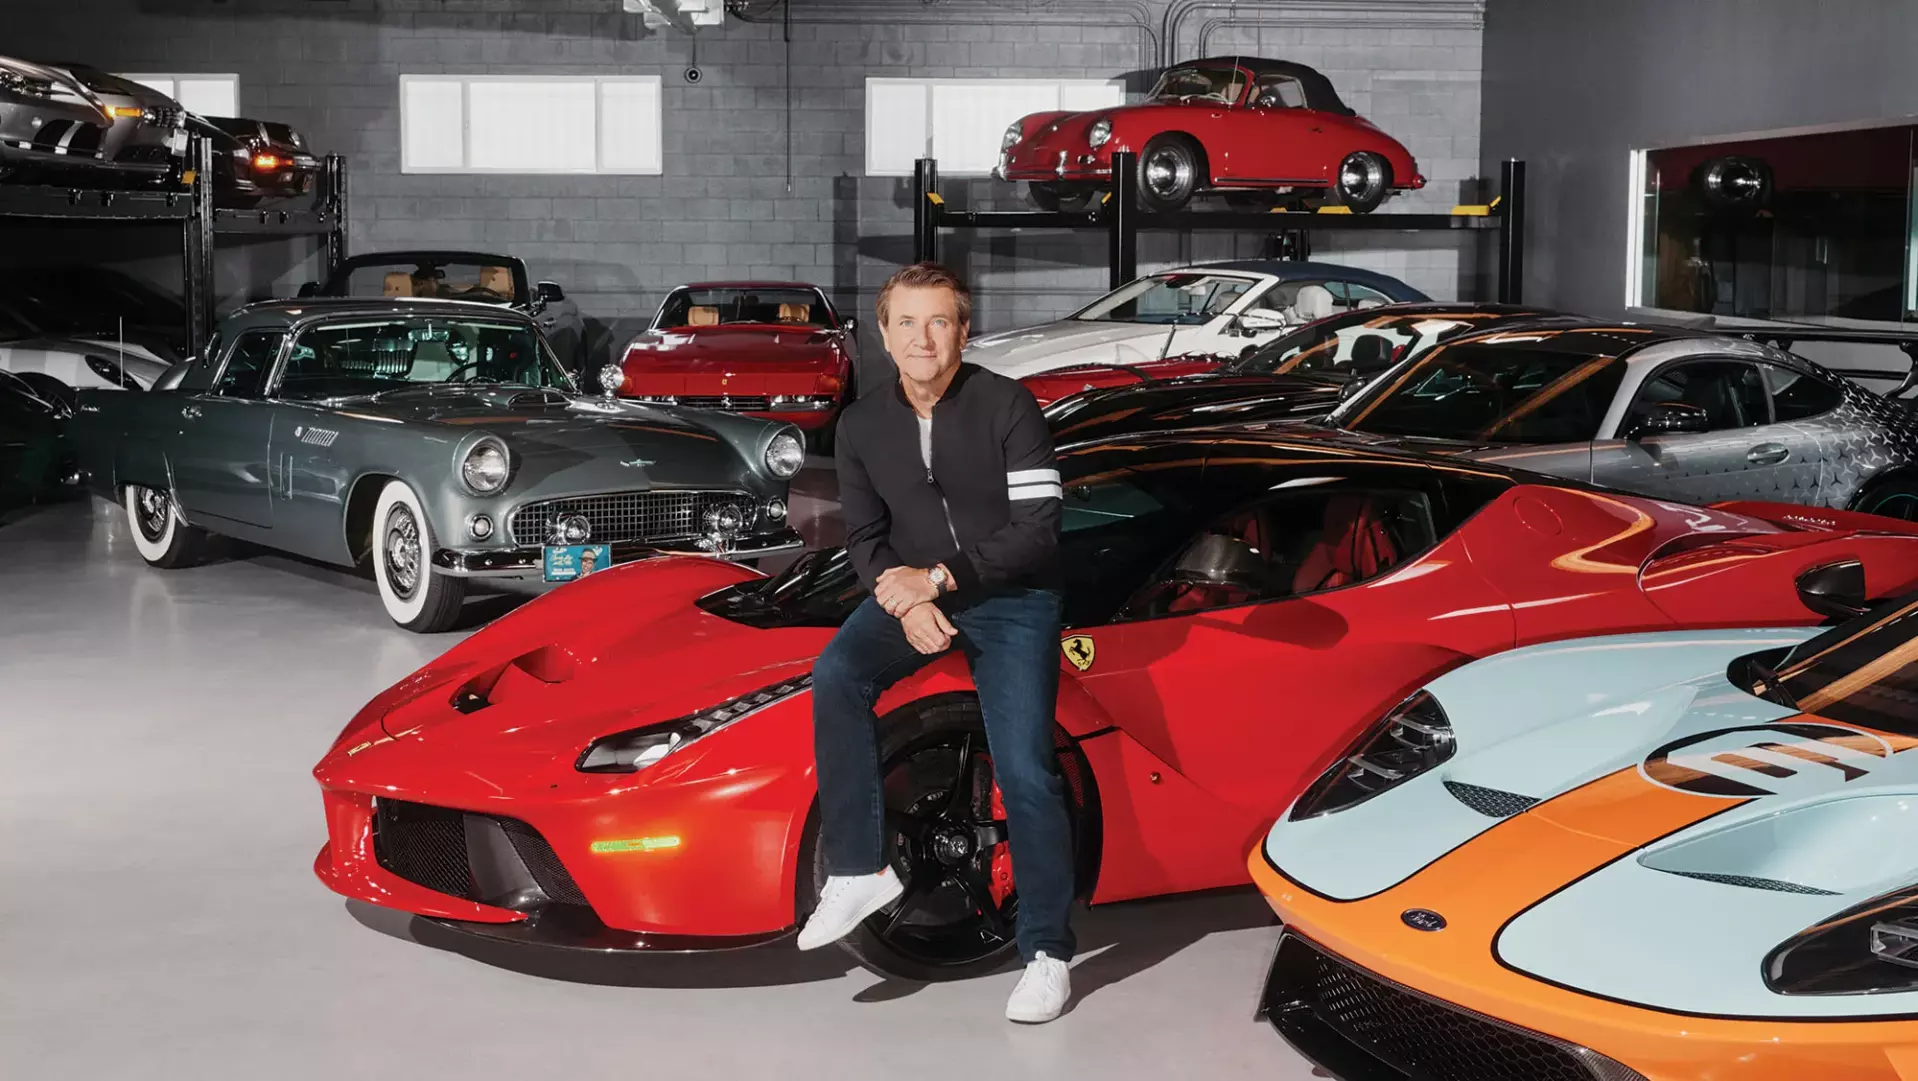 How many assets does Robert Herjavec owns?